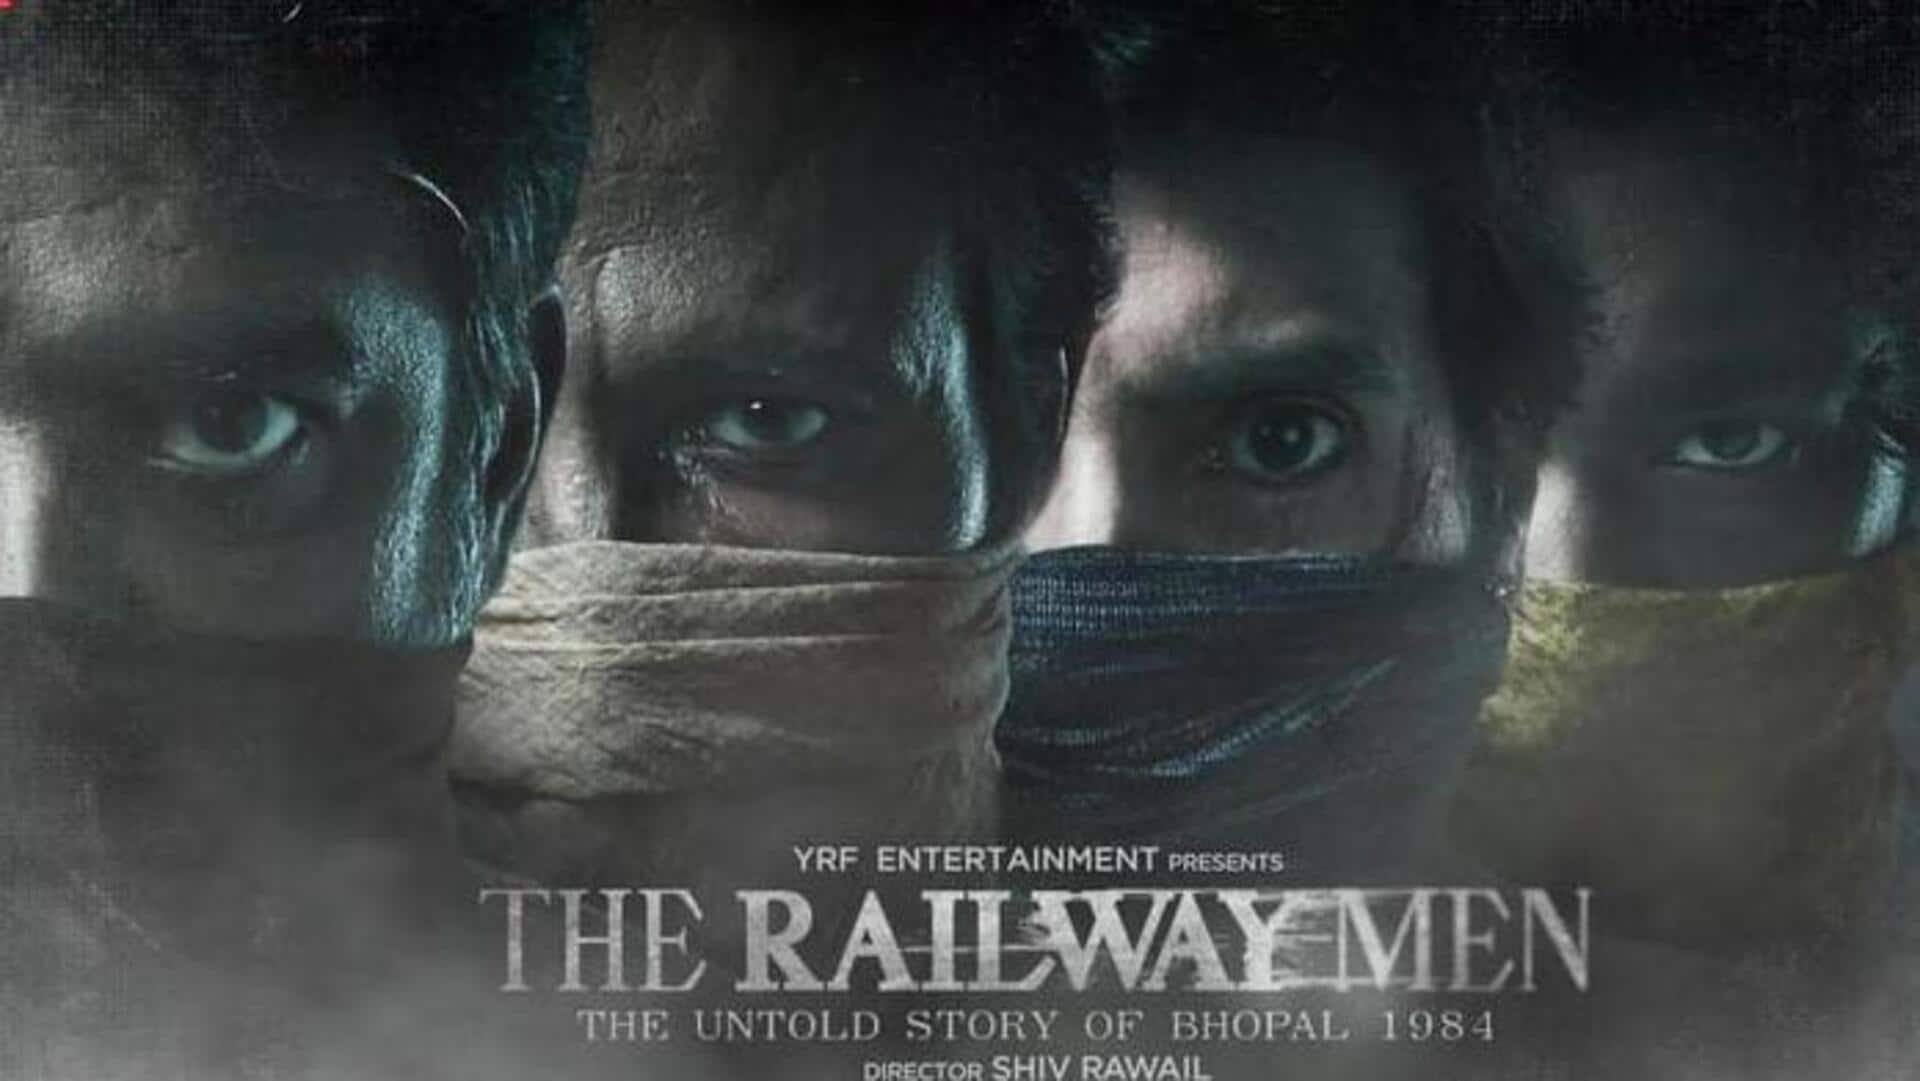 'The Railway Men' review: Hard-hitting series captures horrors of 1984